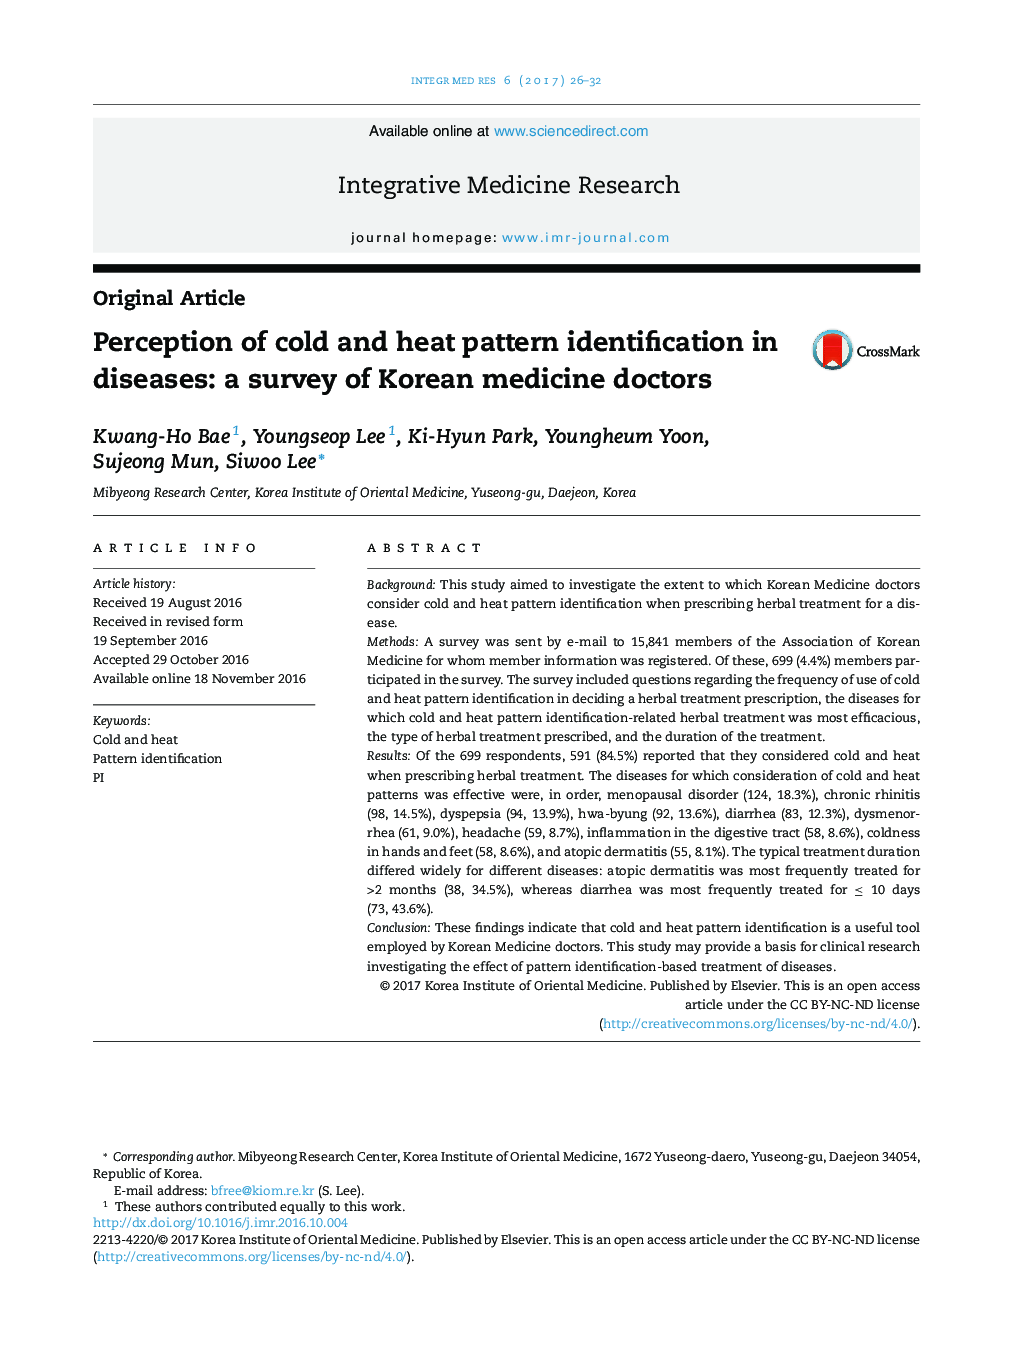 Perception of cold and heat pattern identification in diseases: a survey of Korean medicine doctors